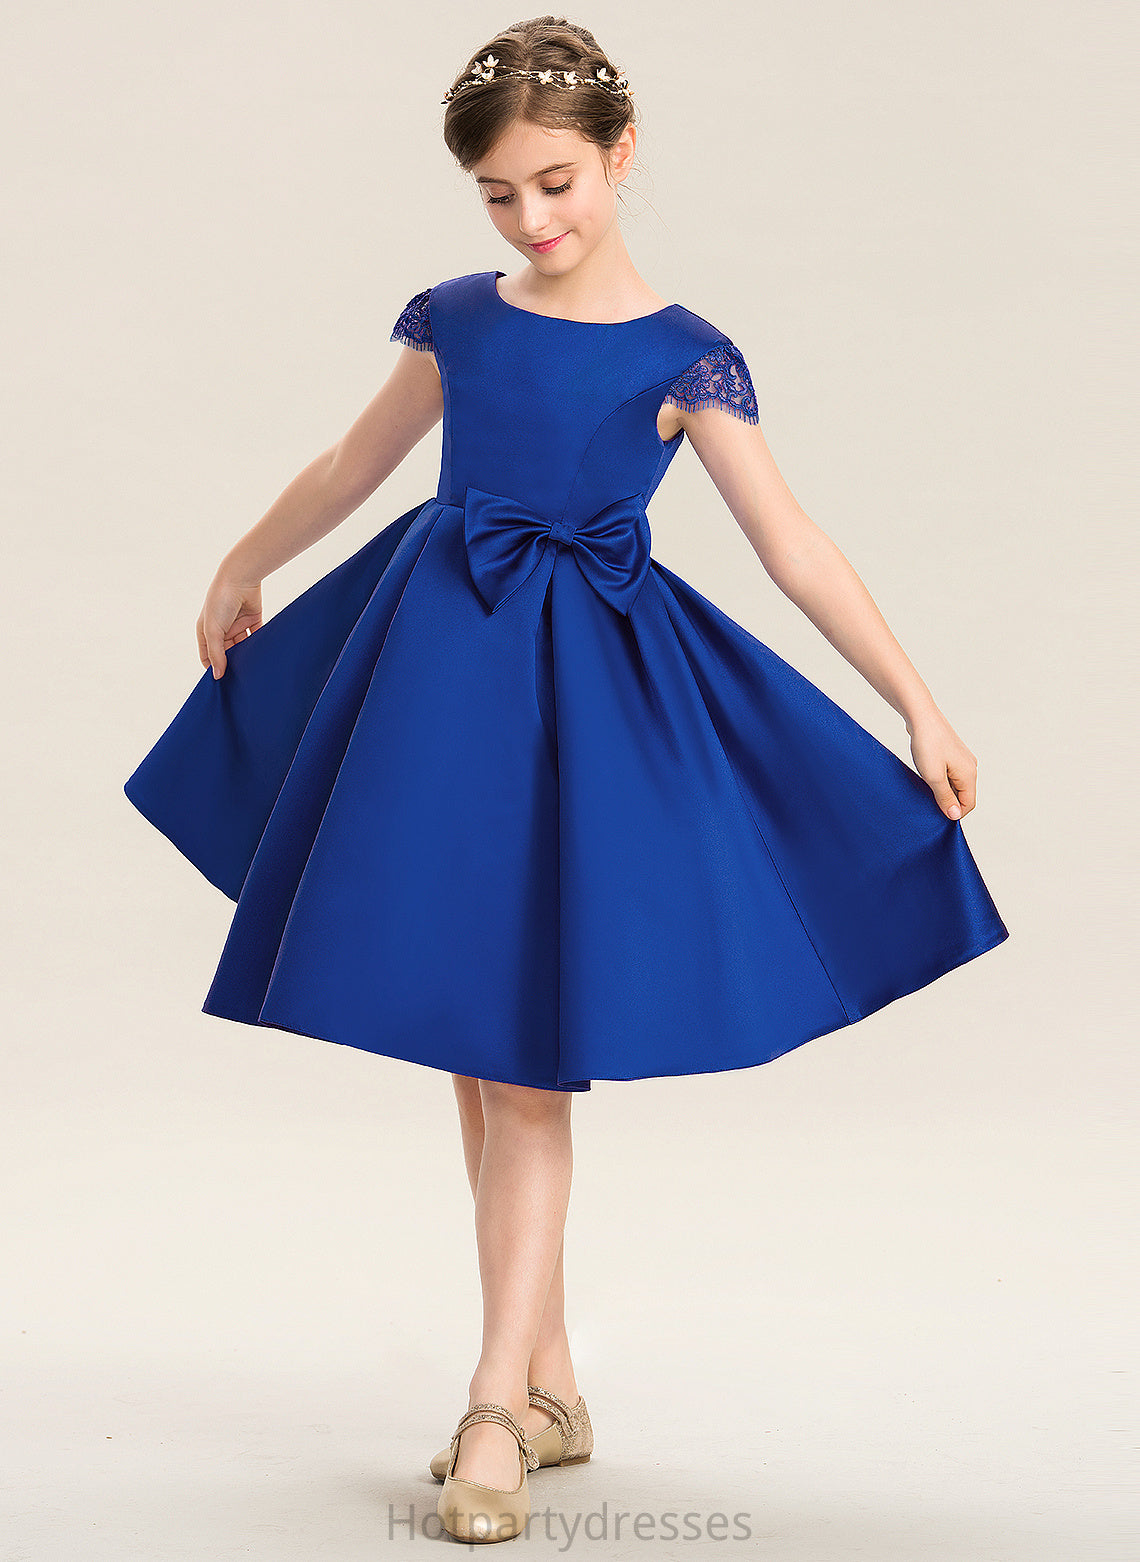 Lace Cadence Scoop Knee-Length With Bow(s) Junior Bridesmaid Dresses Neck A-Line Satin